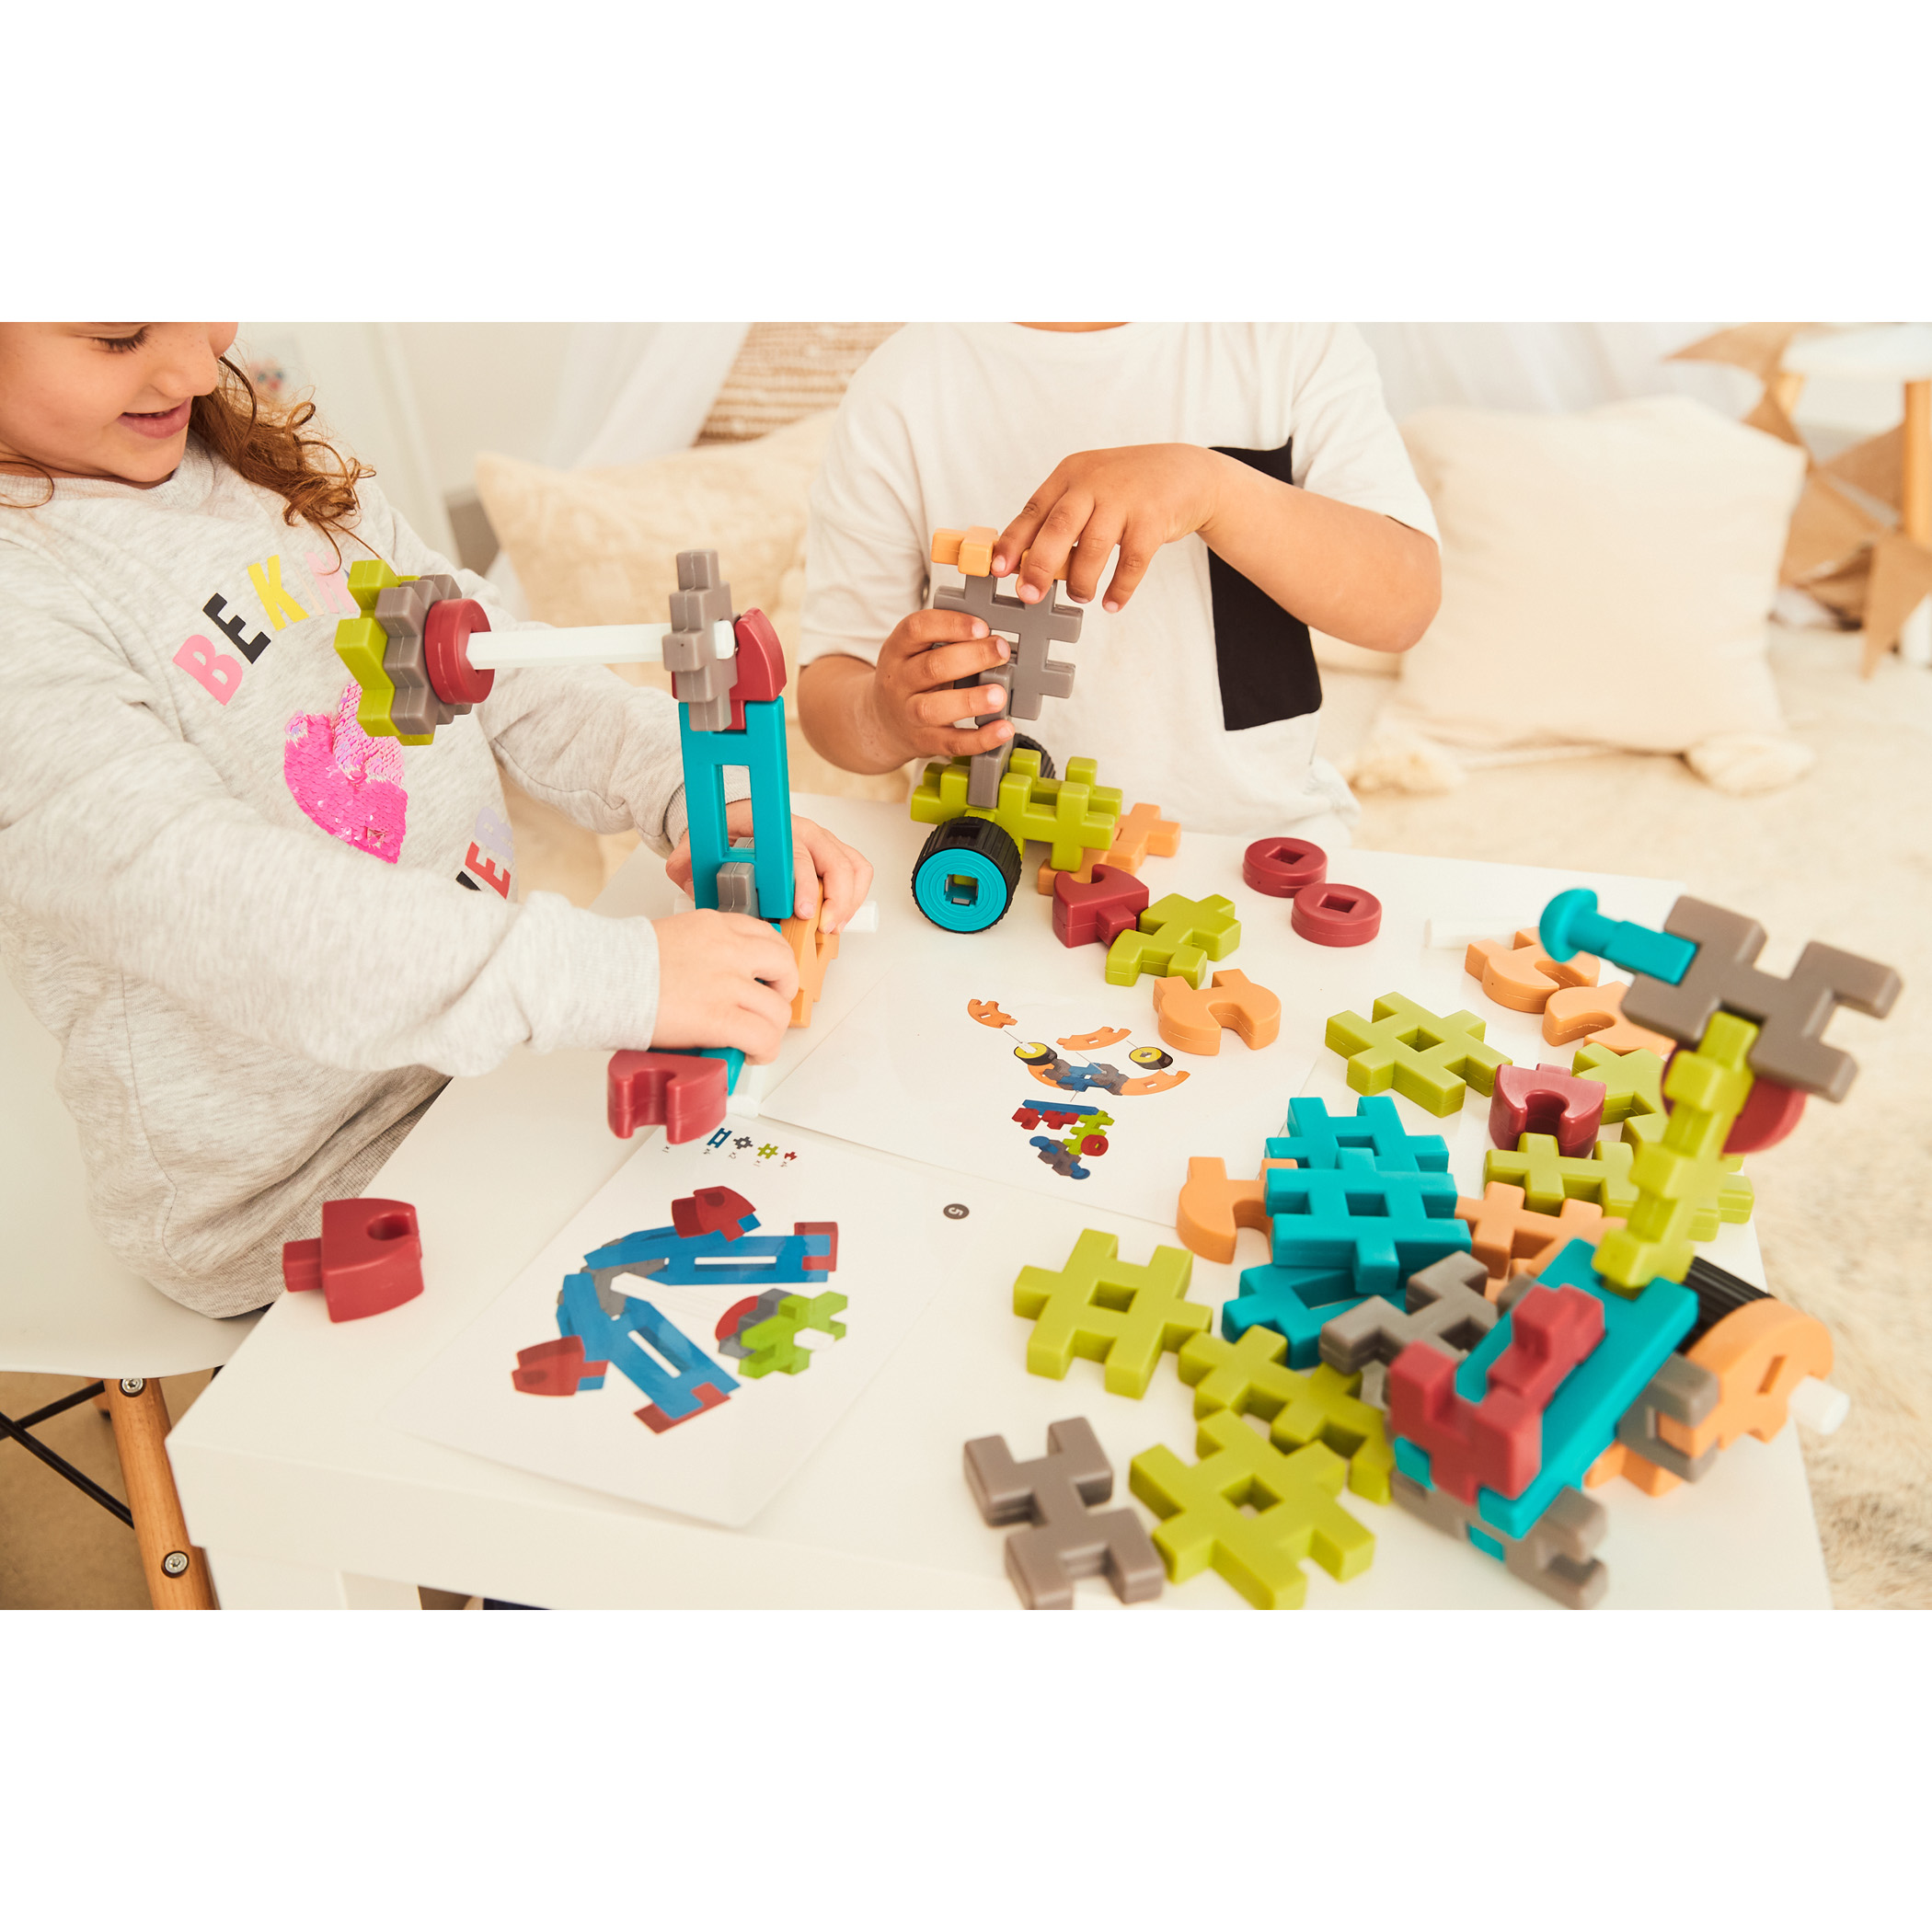 edxeducation Fun Blocks Activity Set - 83 Pieces - 19 Shapes - 16 Activity Cards image number null